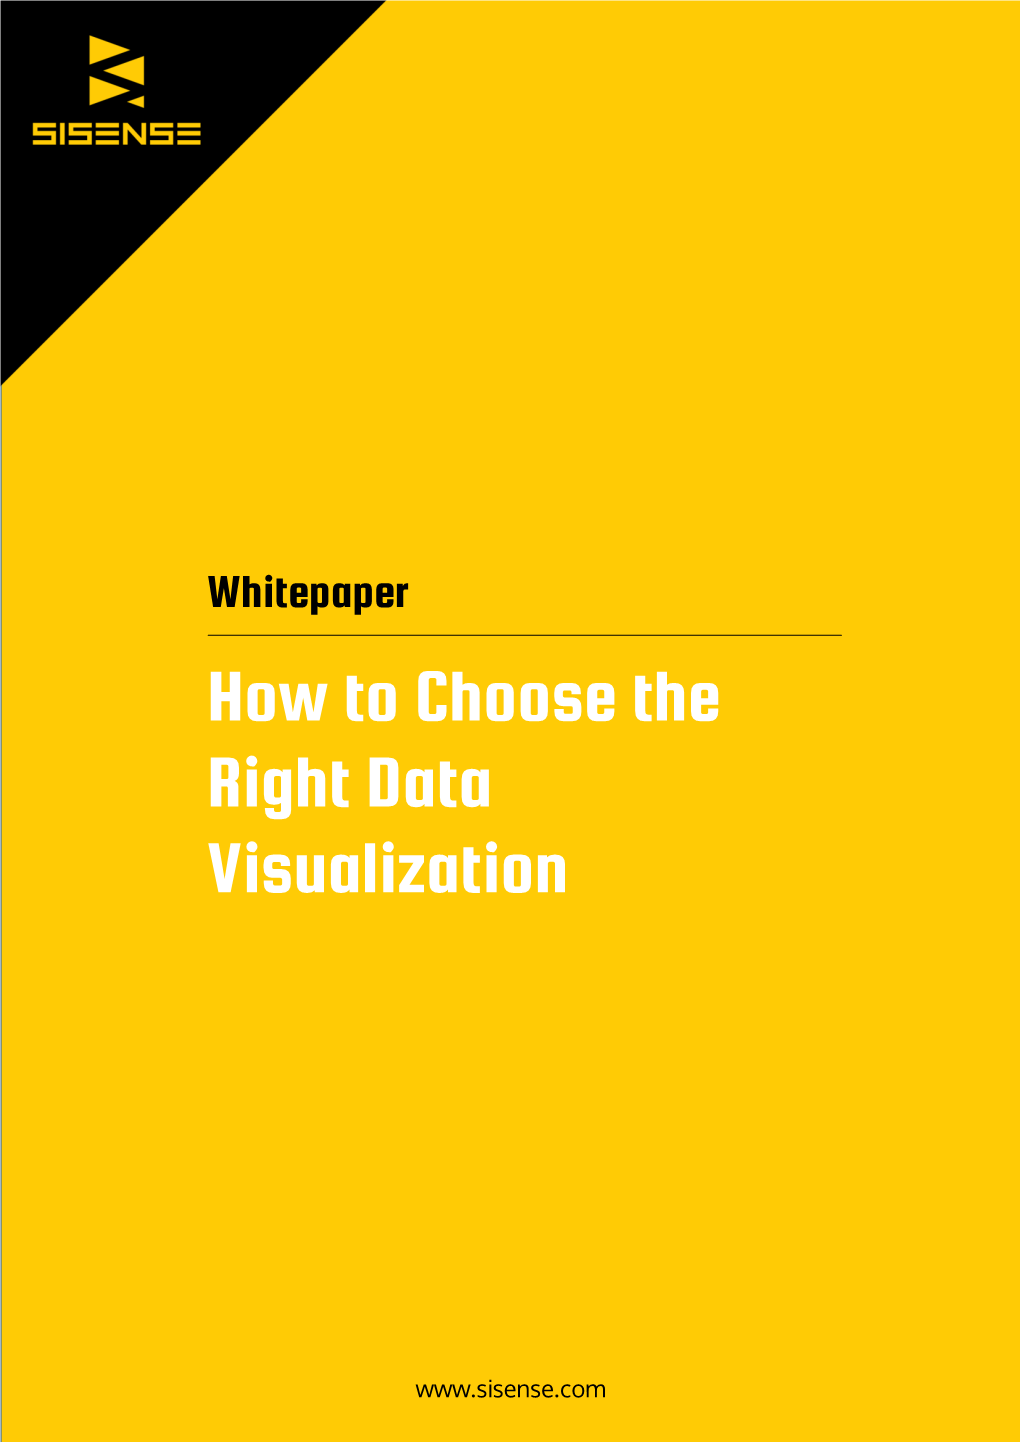 How to Choose the Right Data Visualization